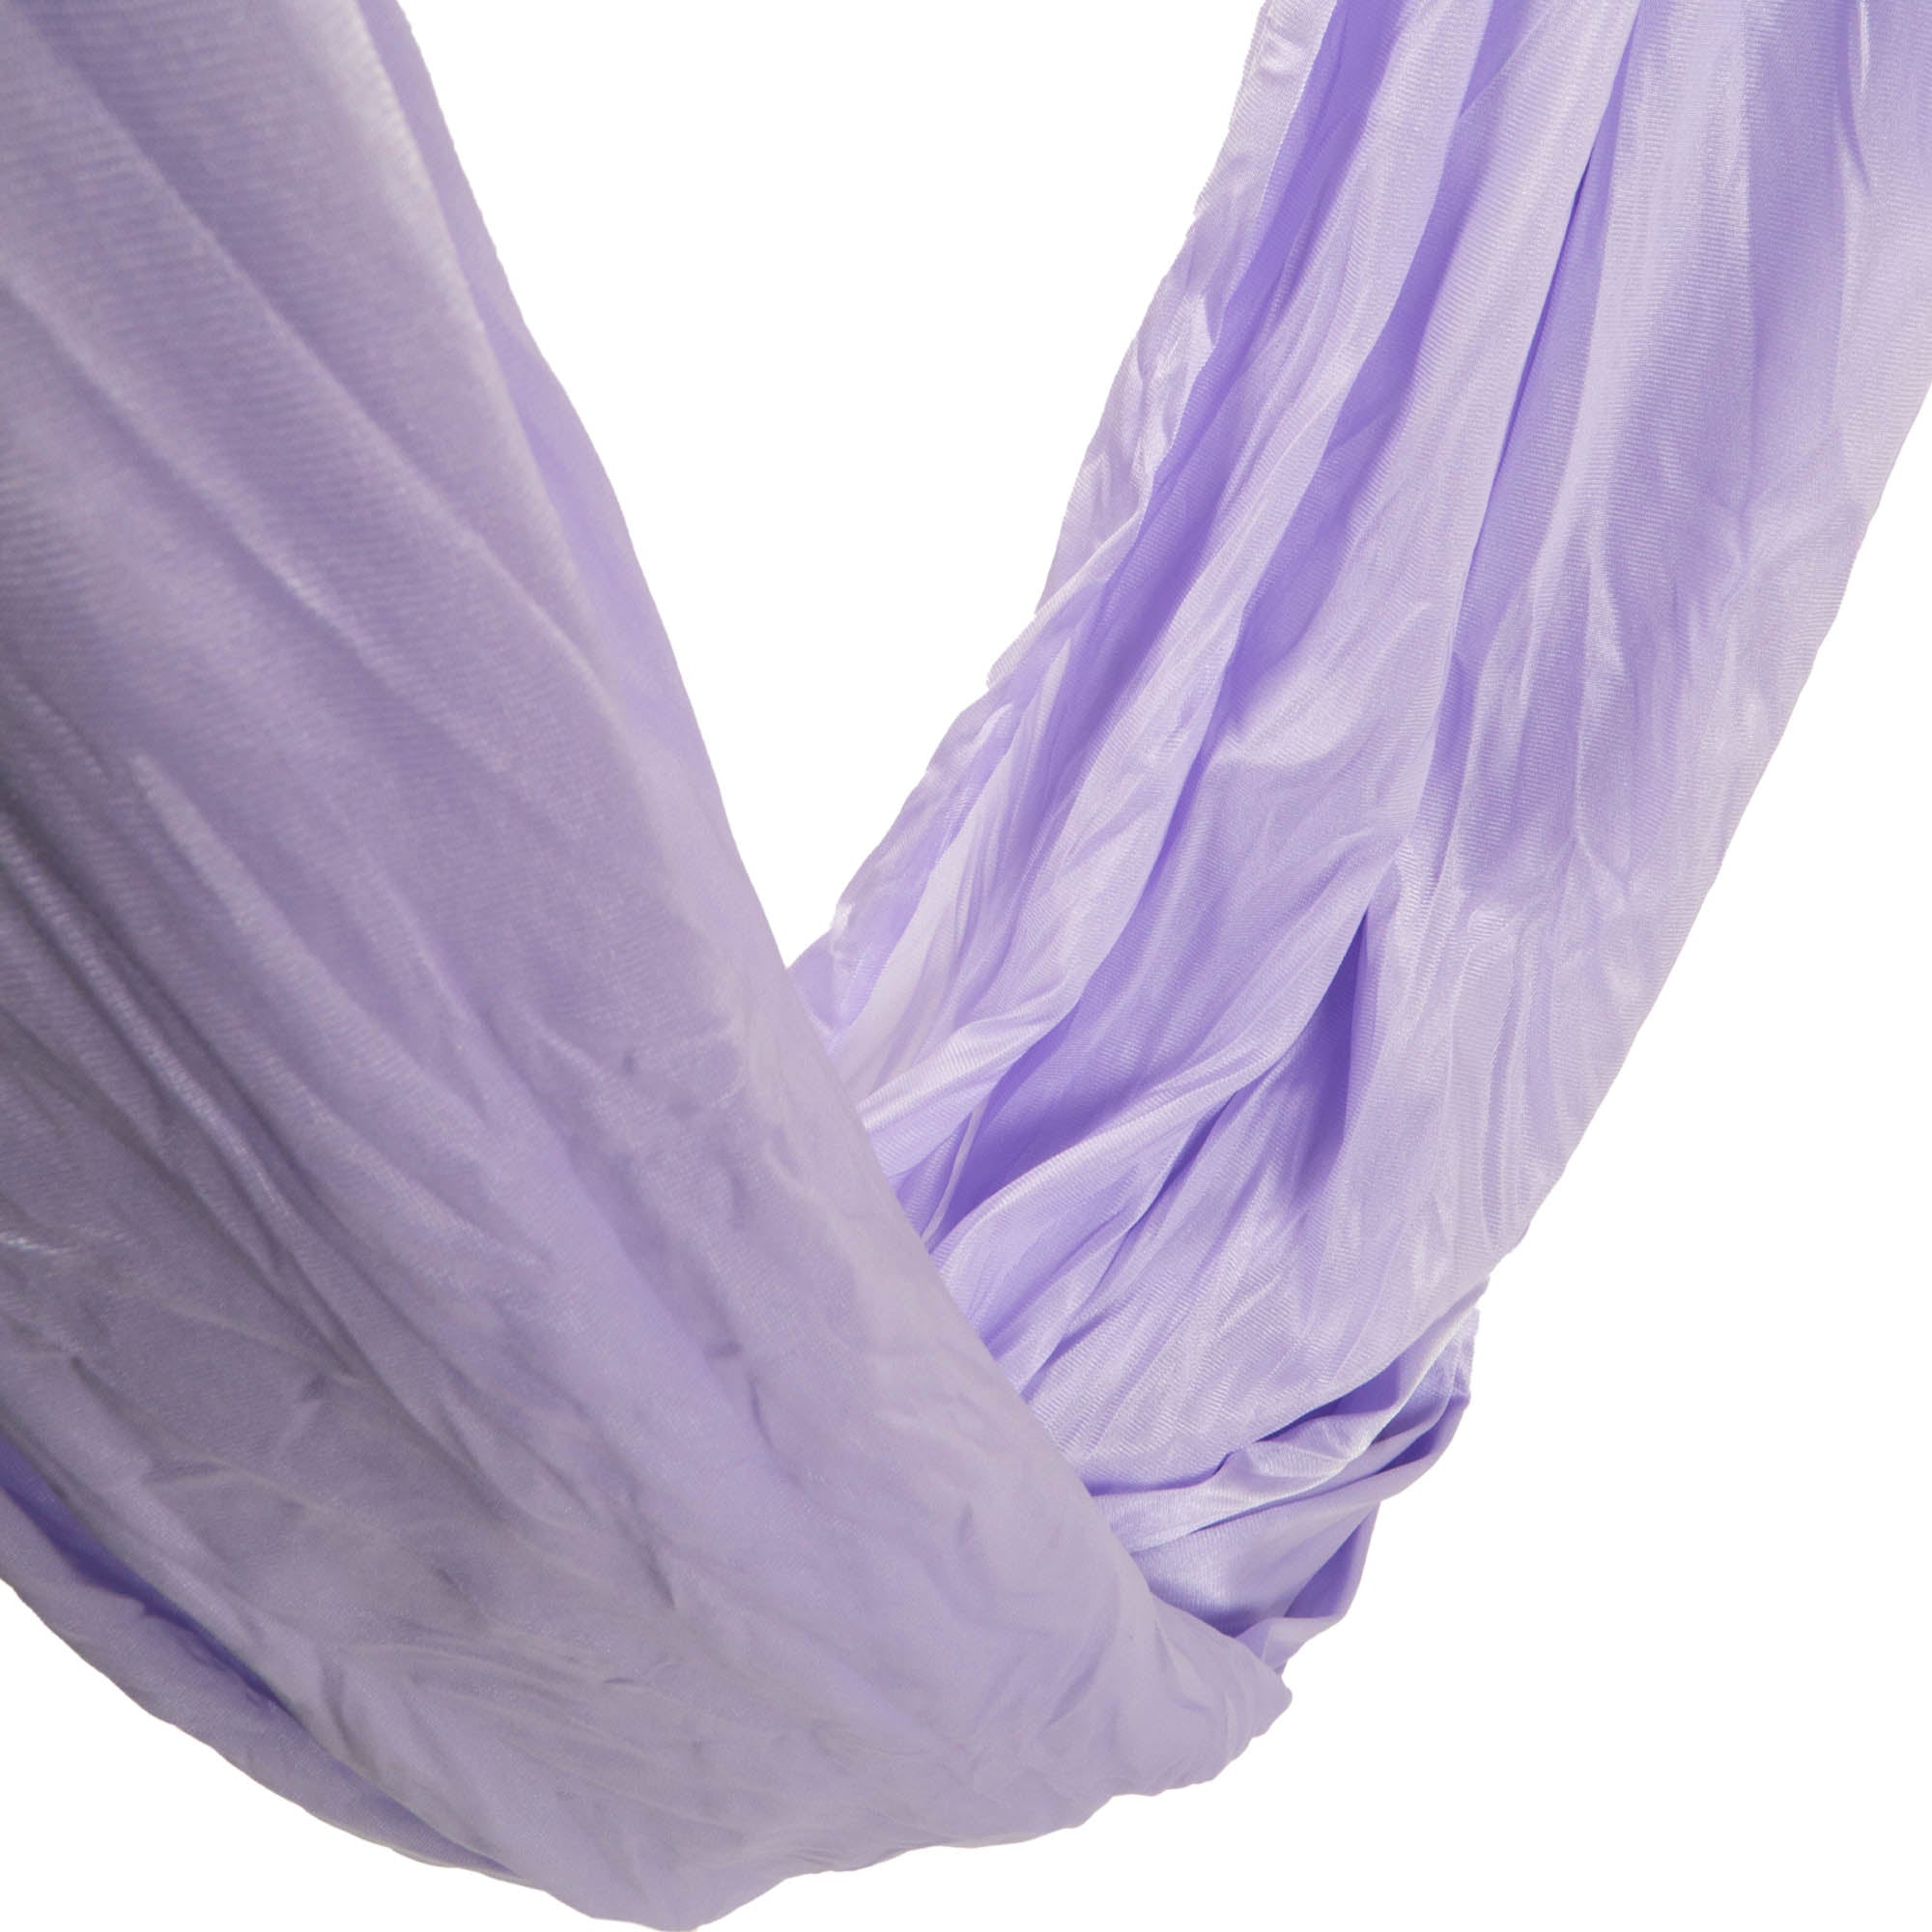 Prodigy 6m aerial yoga hammock in Lilac close up 